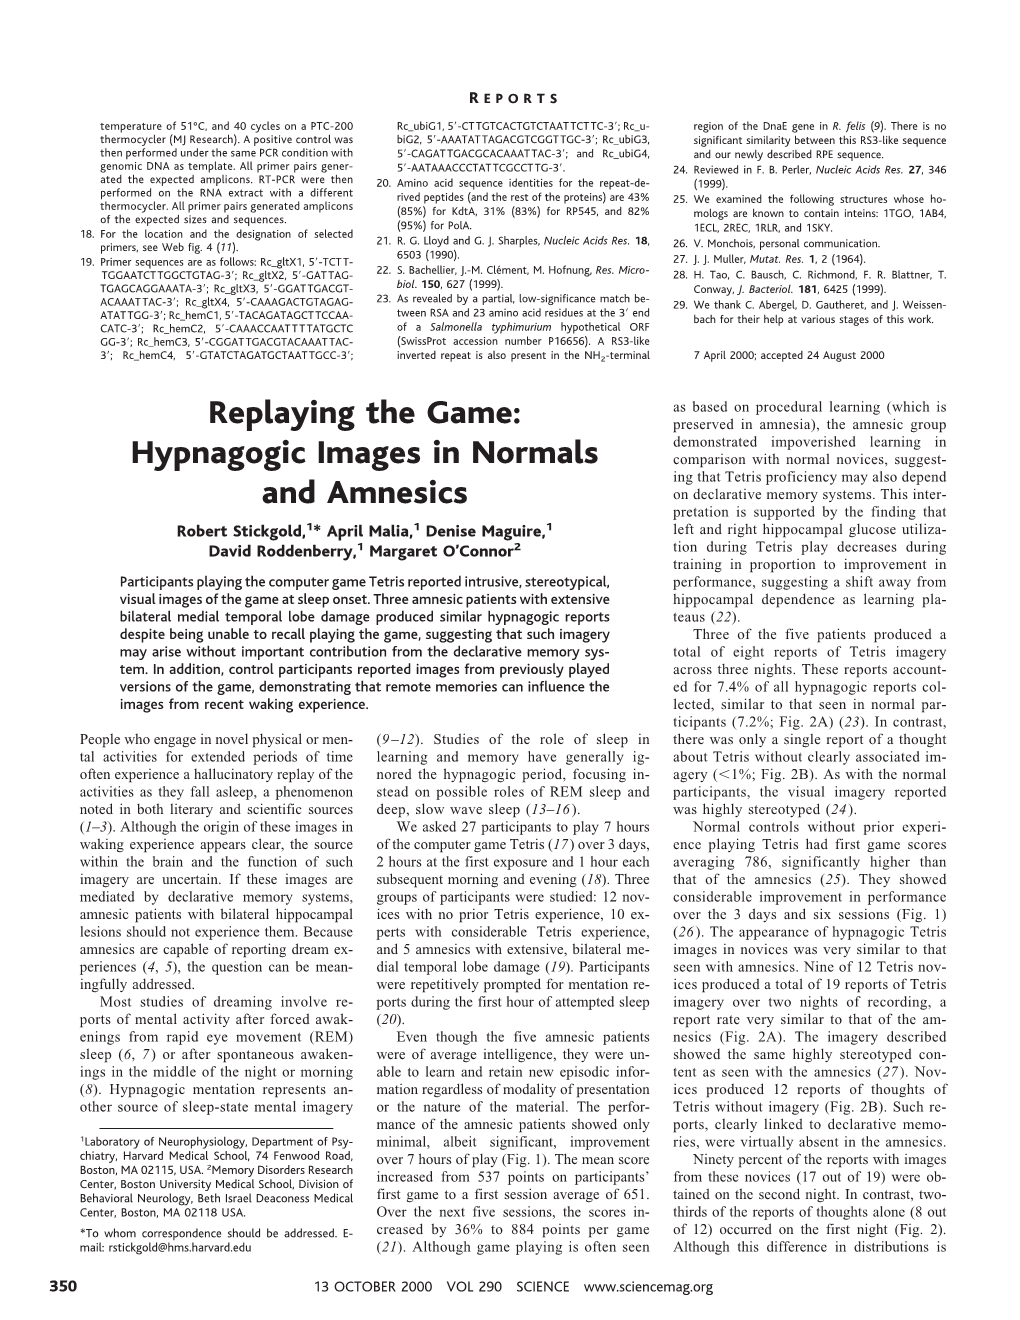 Replaying the Game: Hypnagogic Images in Normals and Amnesics